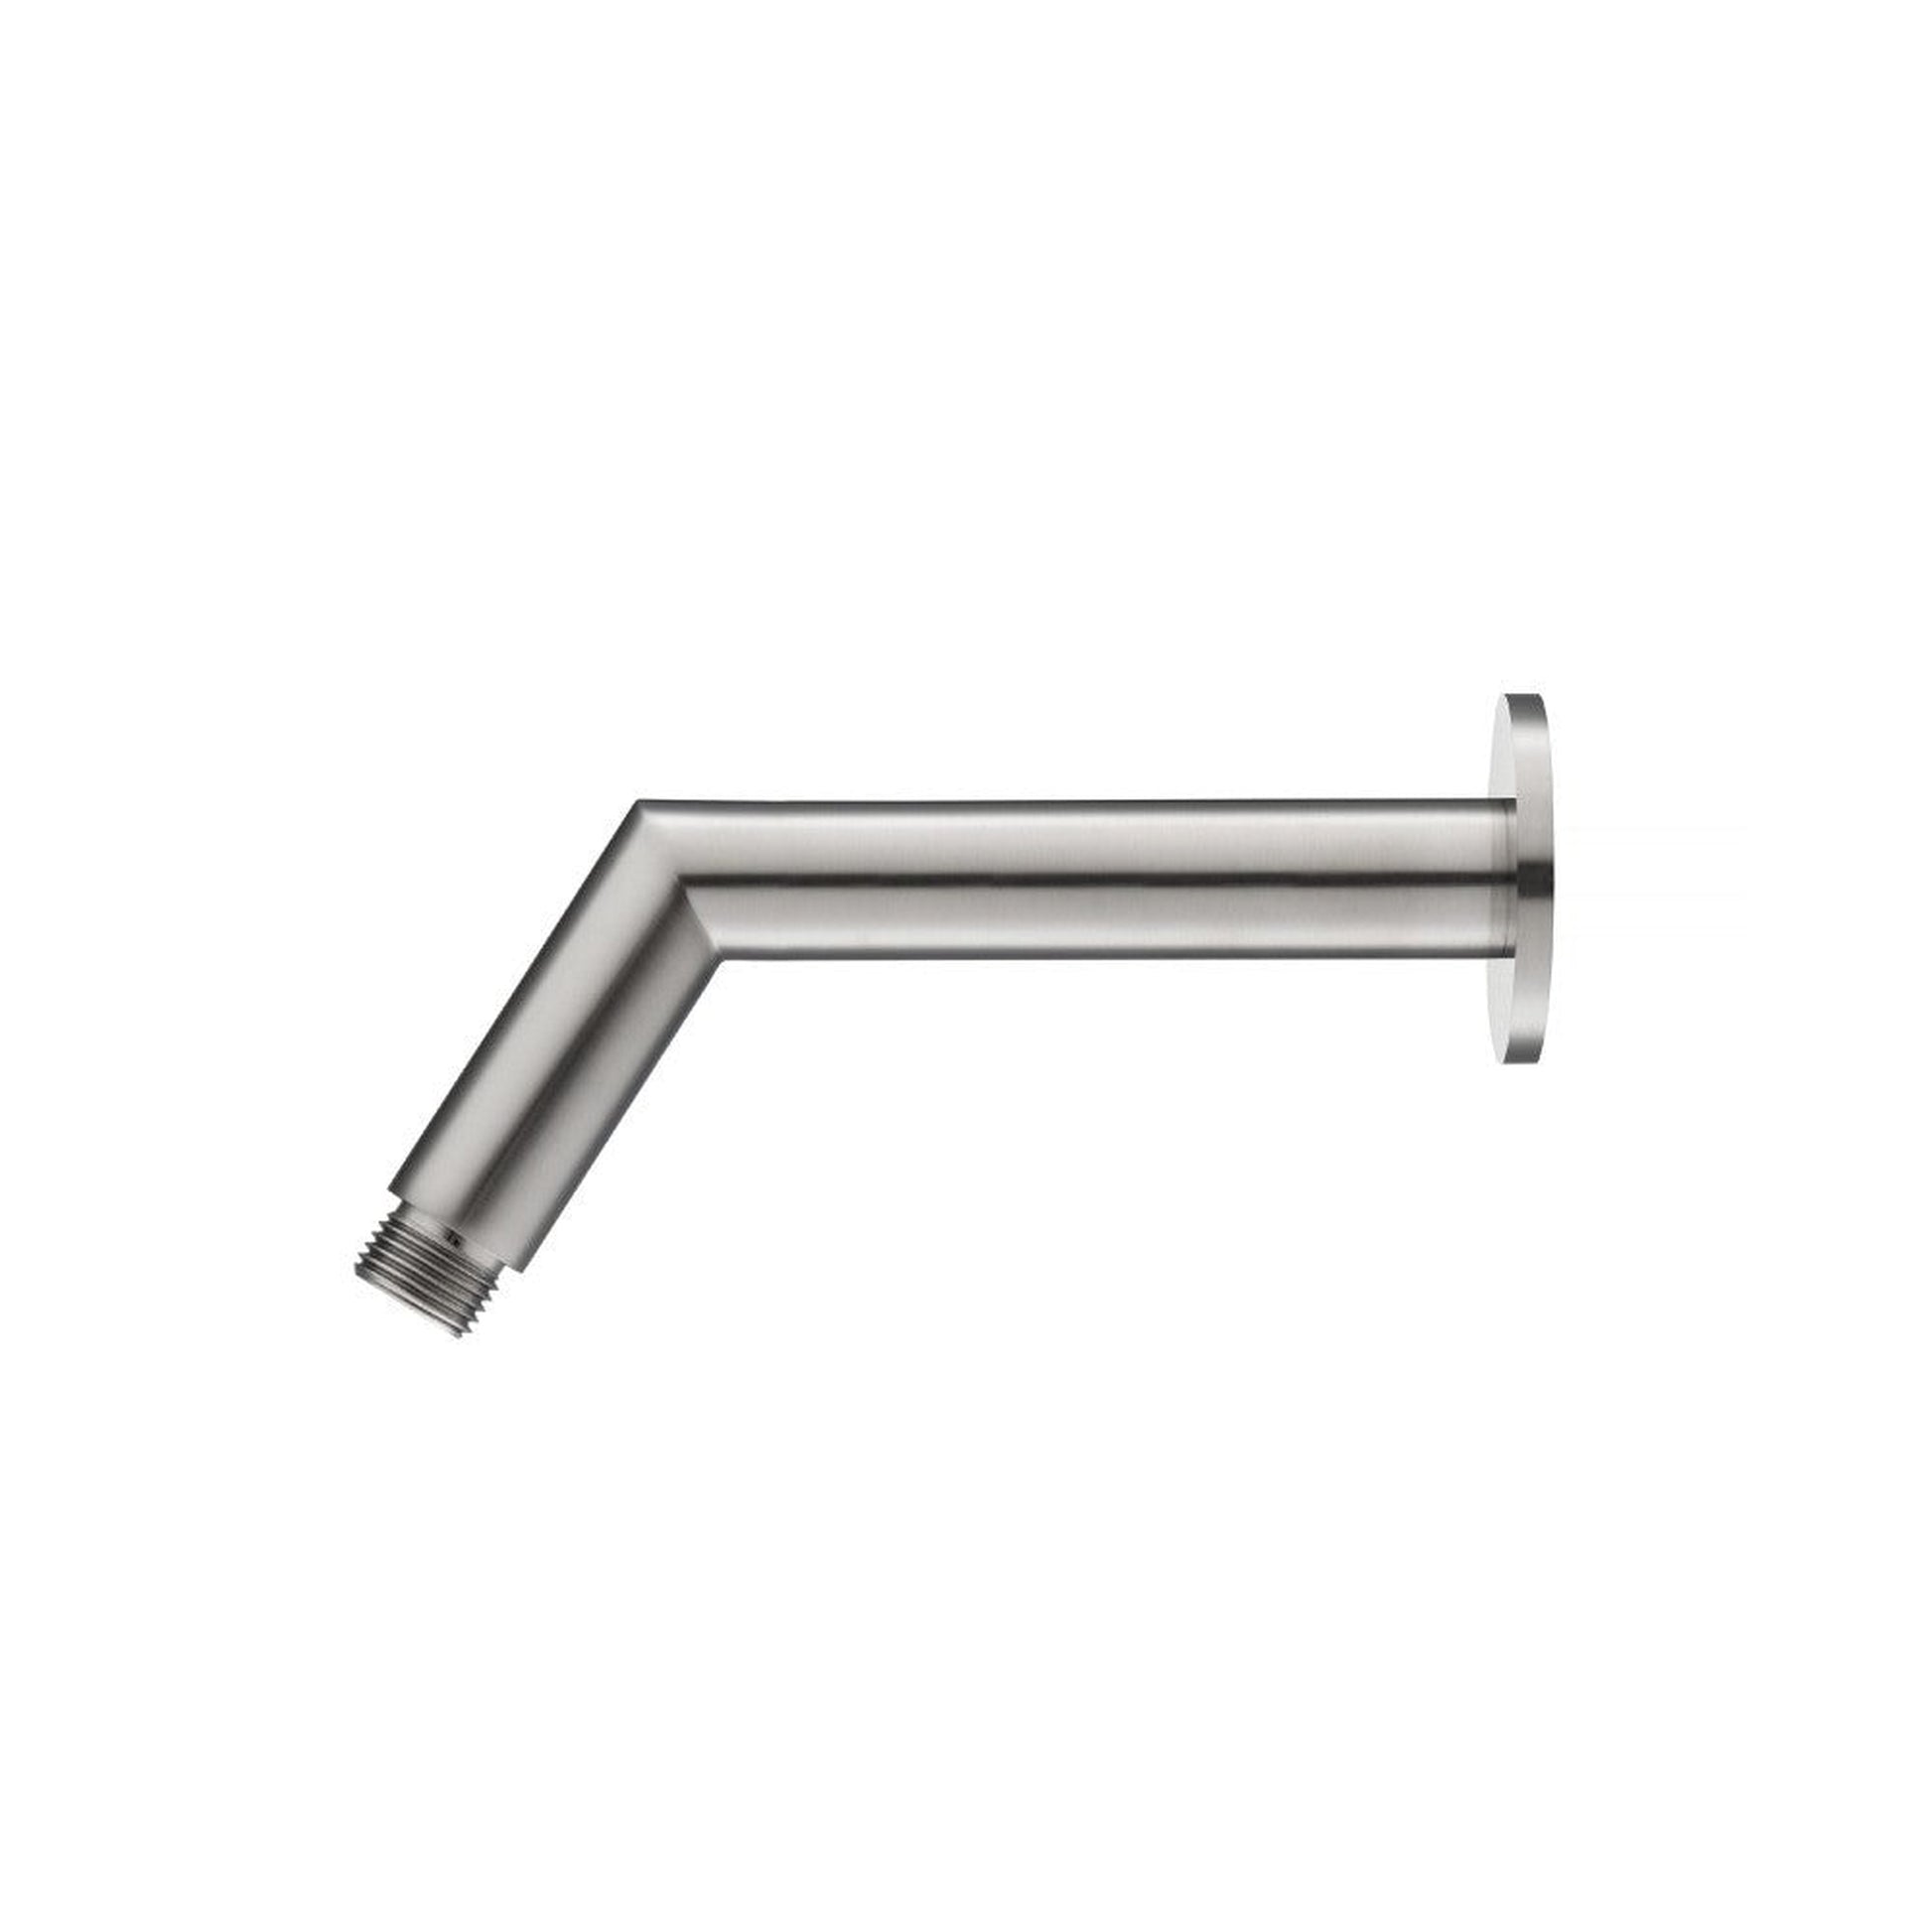 Isenberg Universal Fixtures 6" Polished Nickel PVD Solid Brass Wall-Mounted Standard Shower Arm With Square Sliding Flange